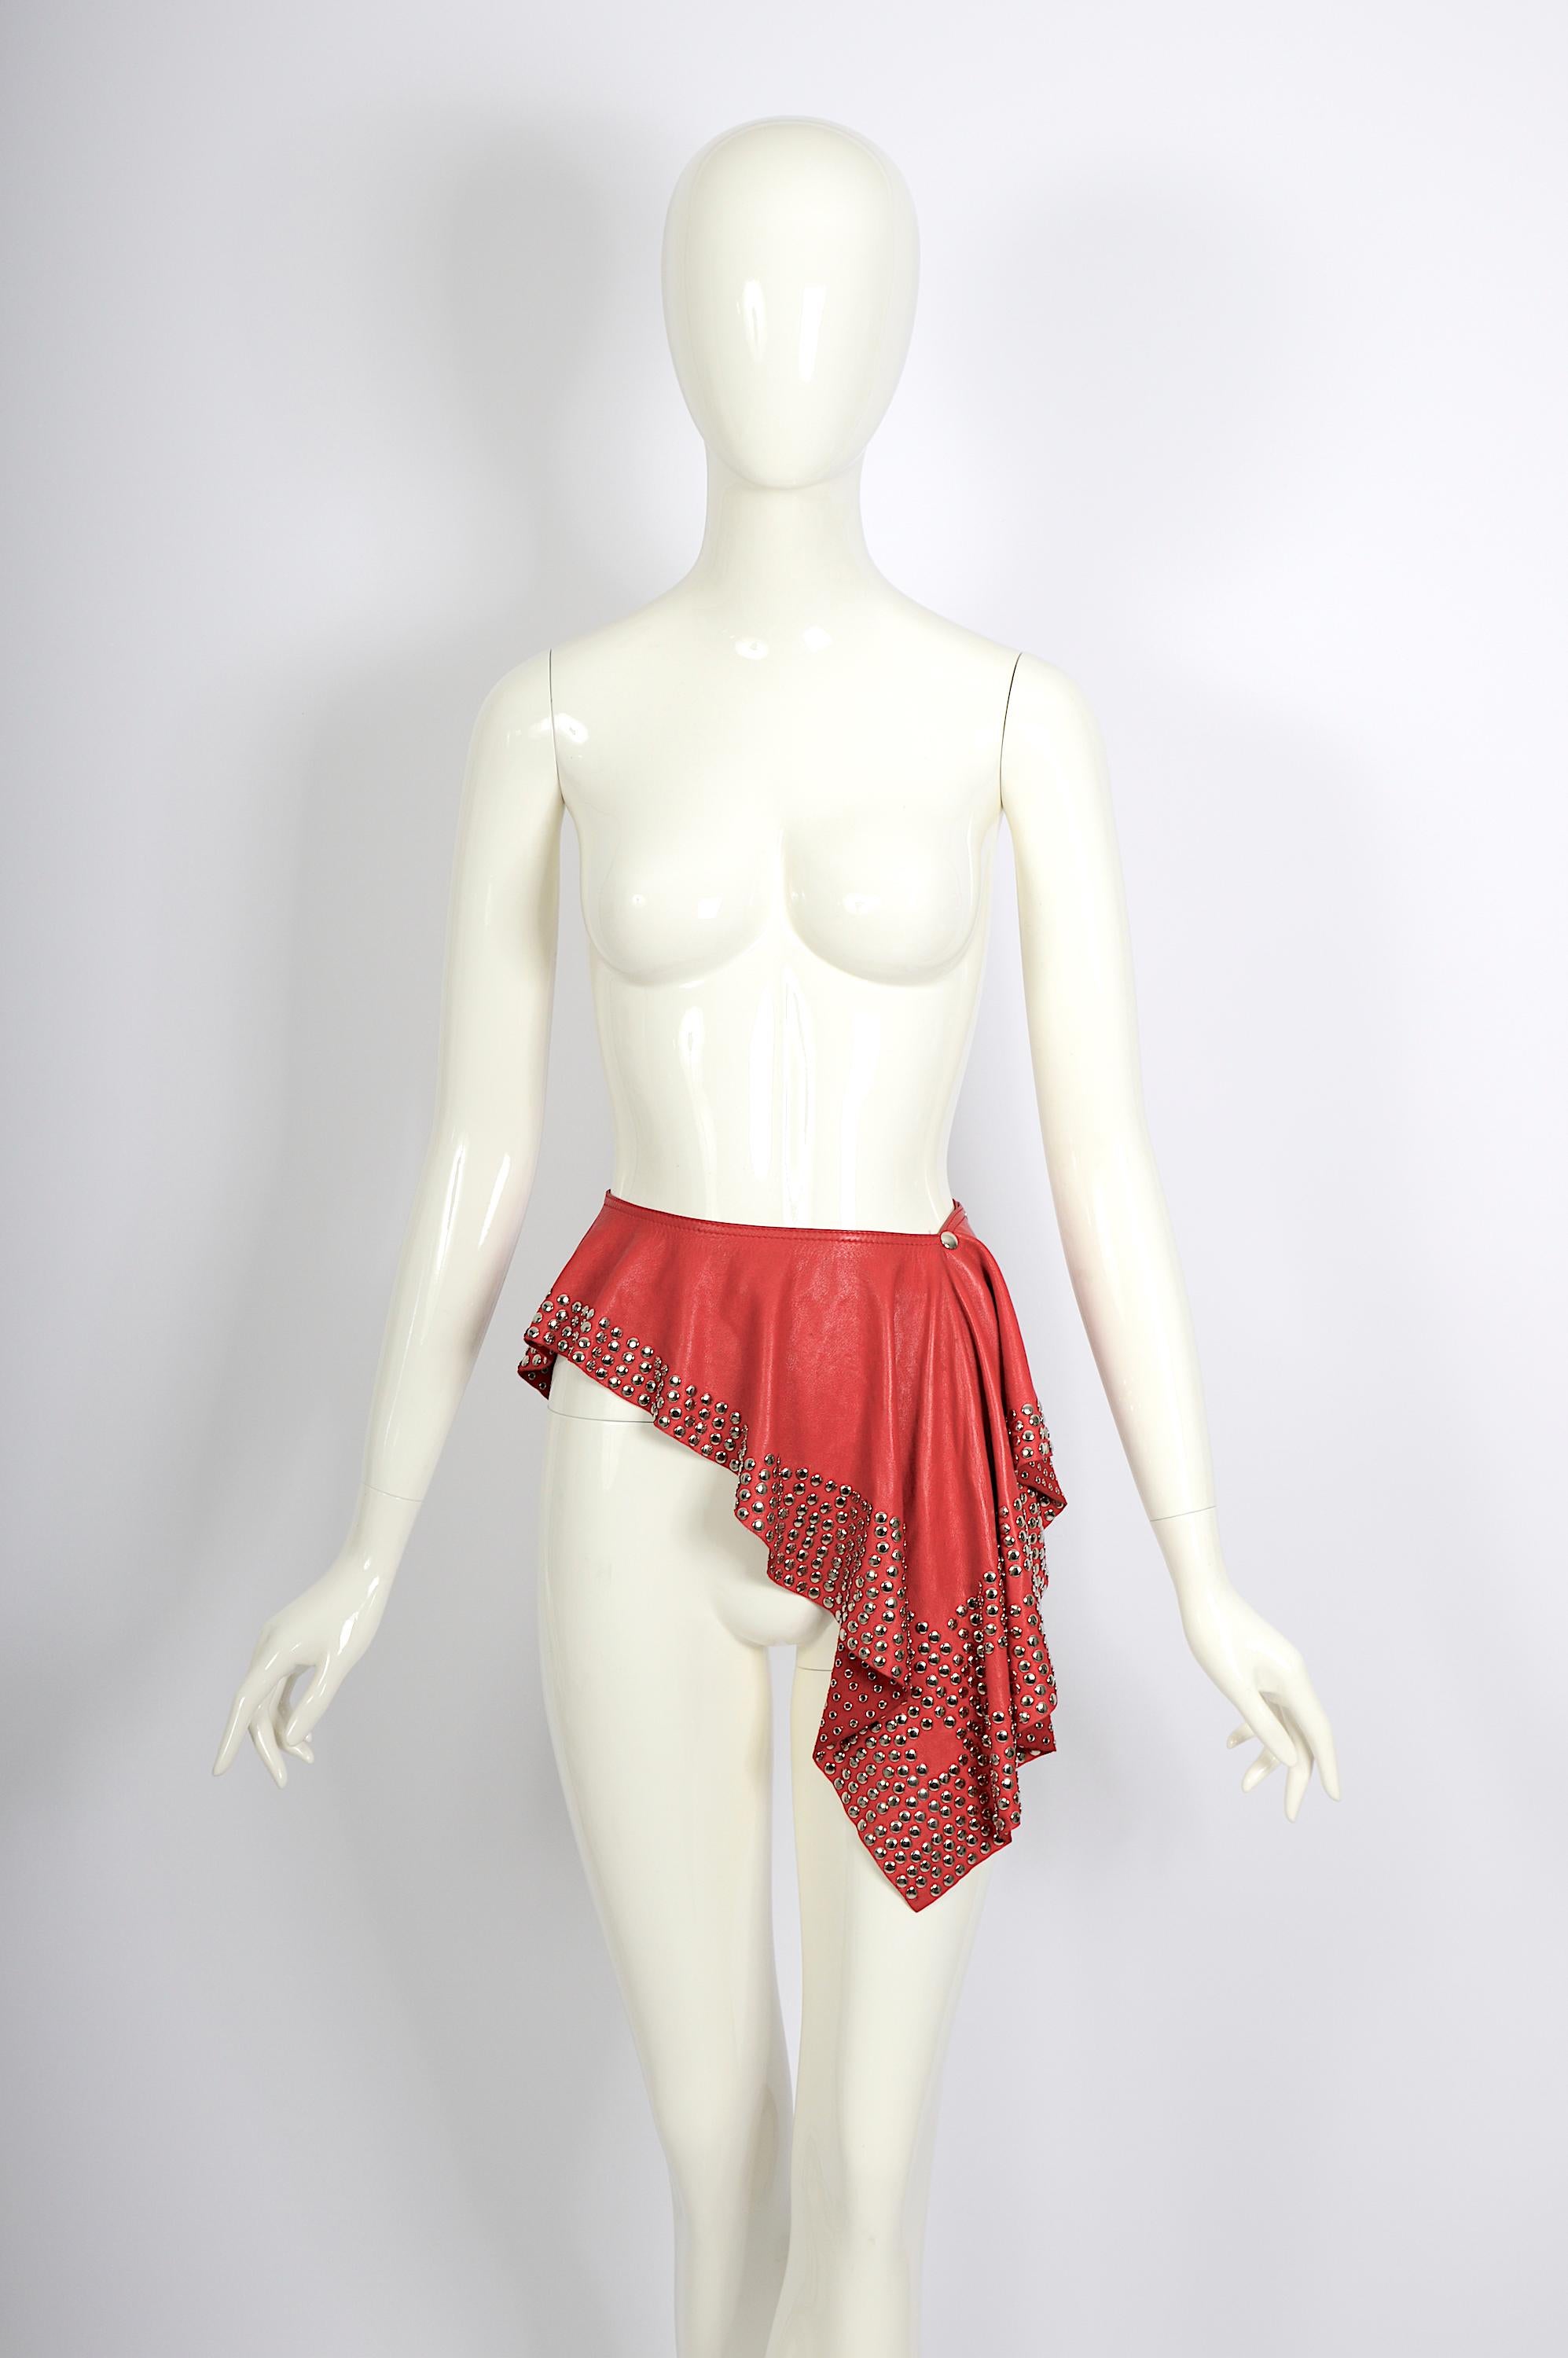 Upgrade your Azzedine Alaïa collection archive with this important, exceptional, unique vintage Alaïa red leather belt skirt from circa 1981.
Made from lambskin leather, it features a chic waist drape embellished with metallic studs. 
The skirt has